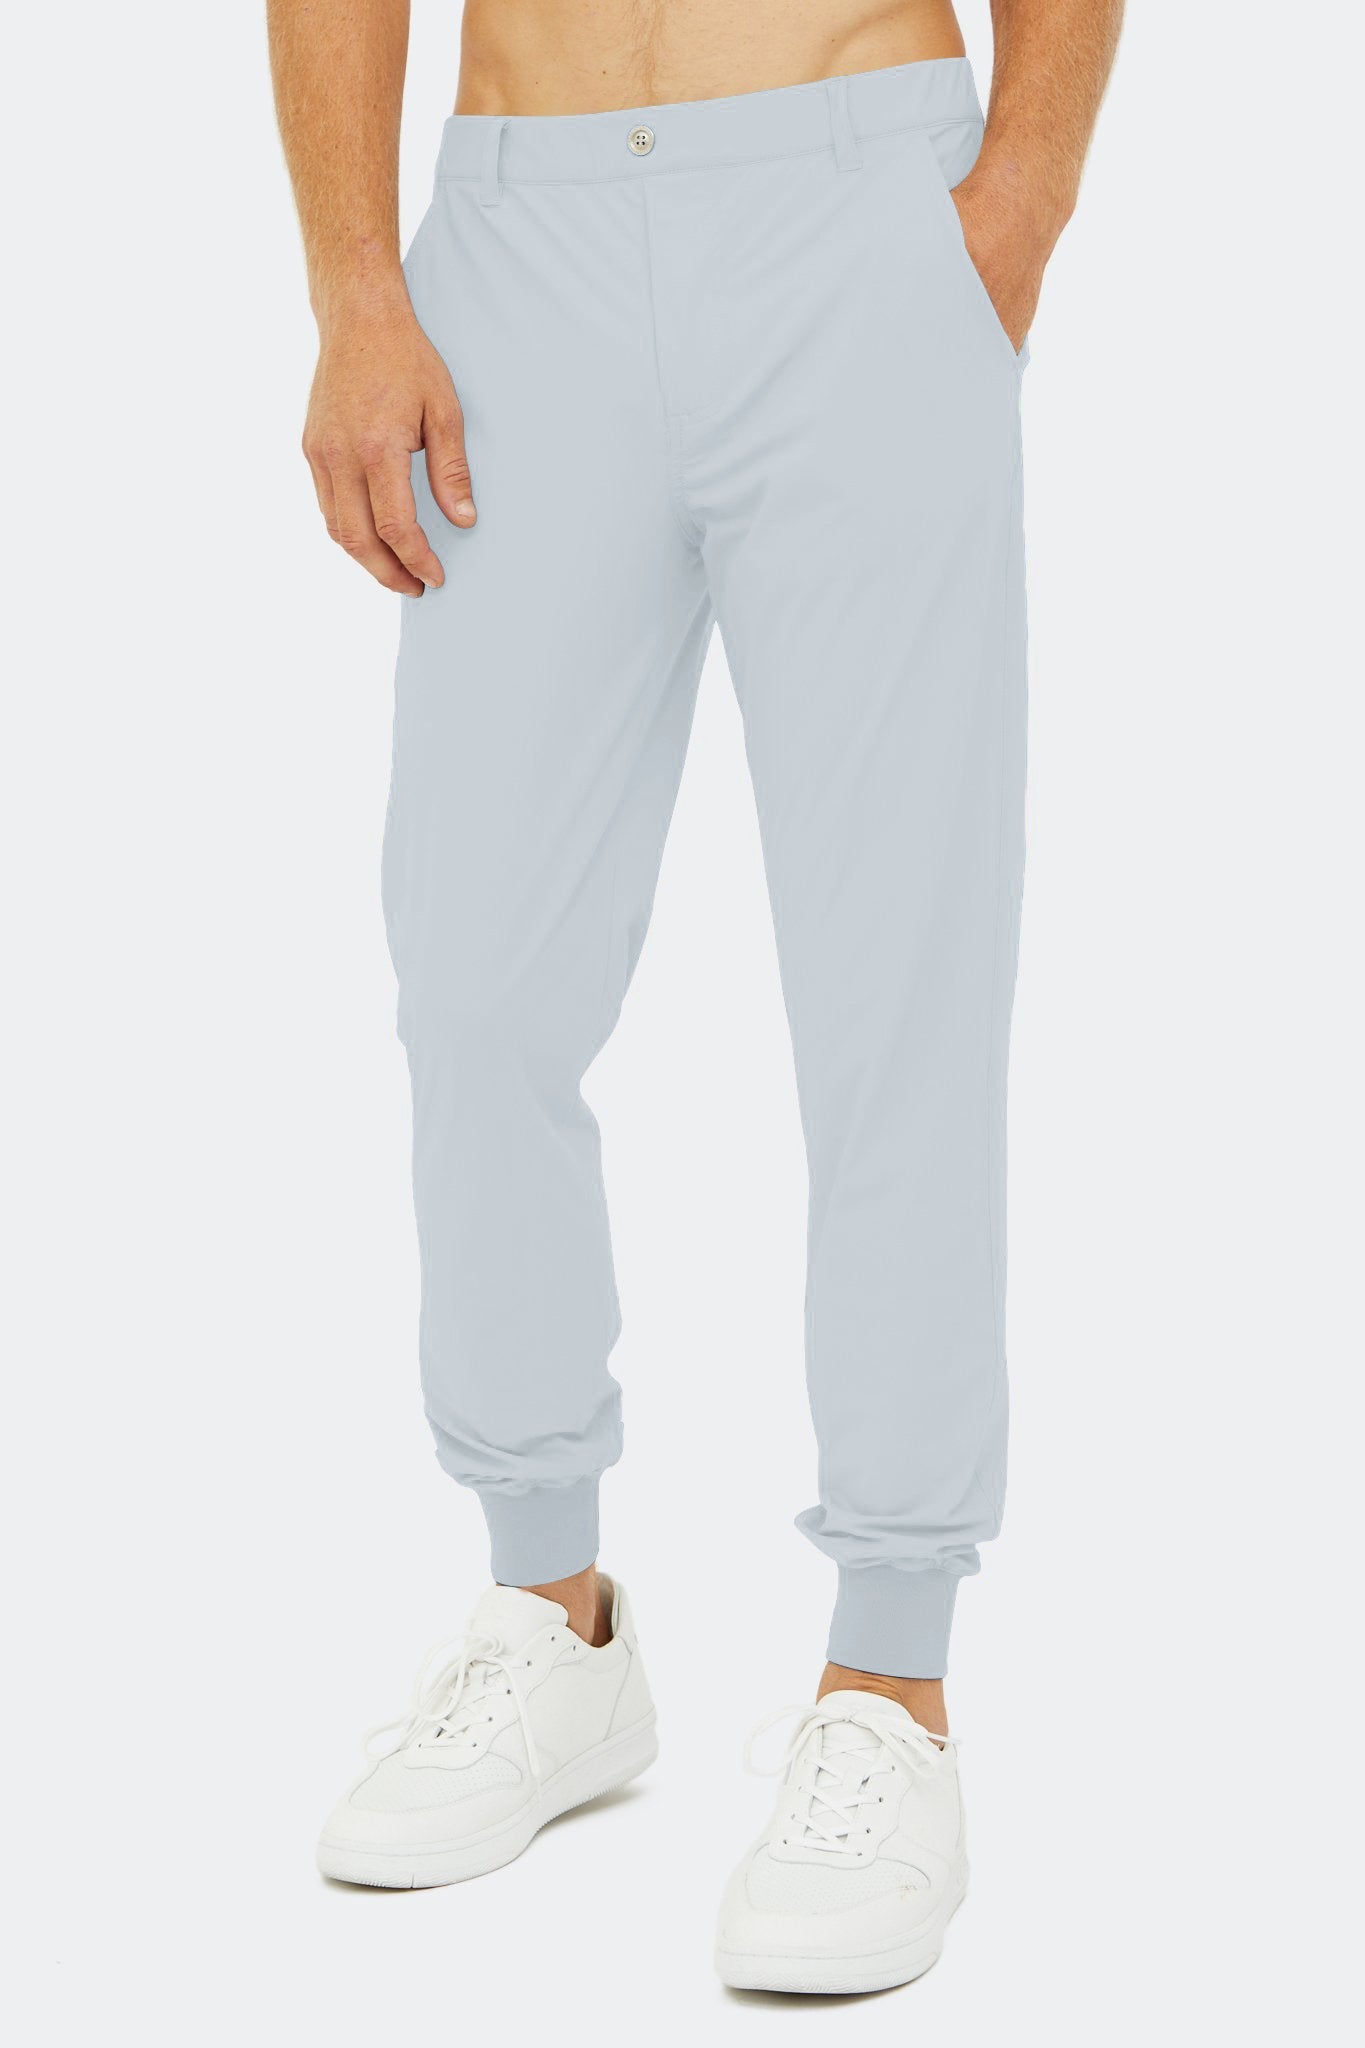 Image of the halliday pull-on jogger in glacier gray